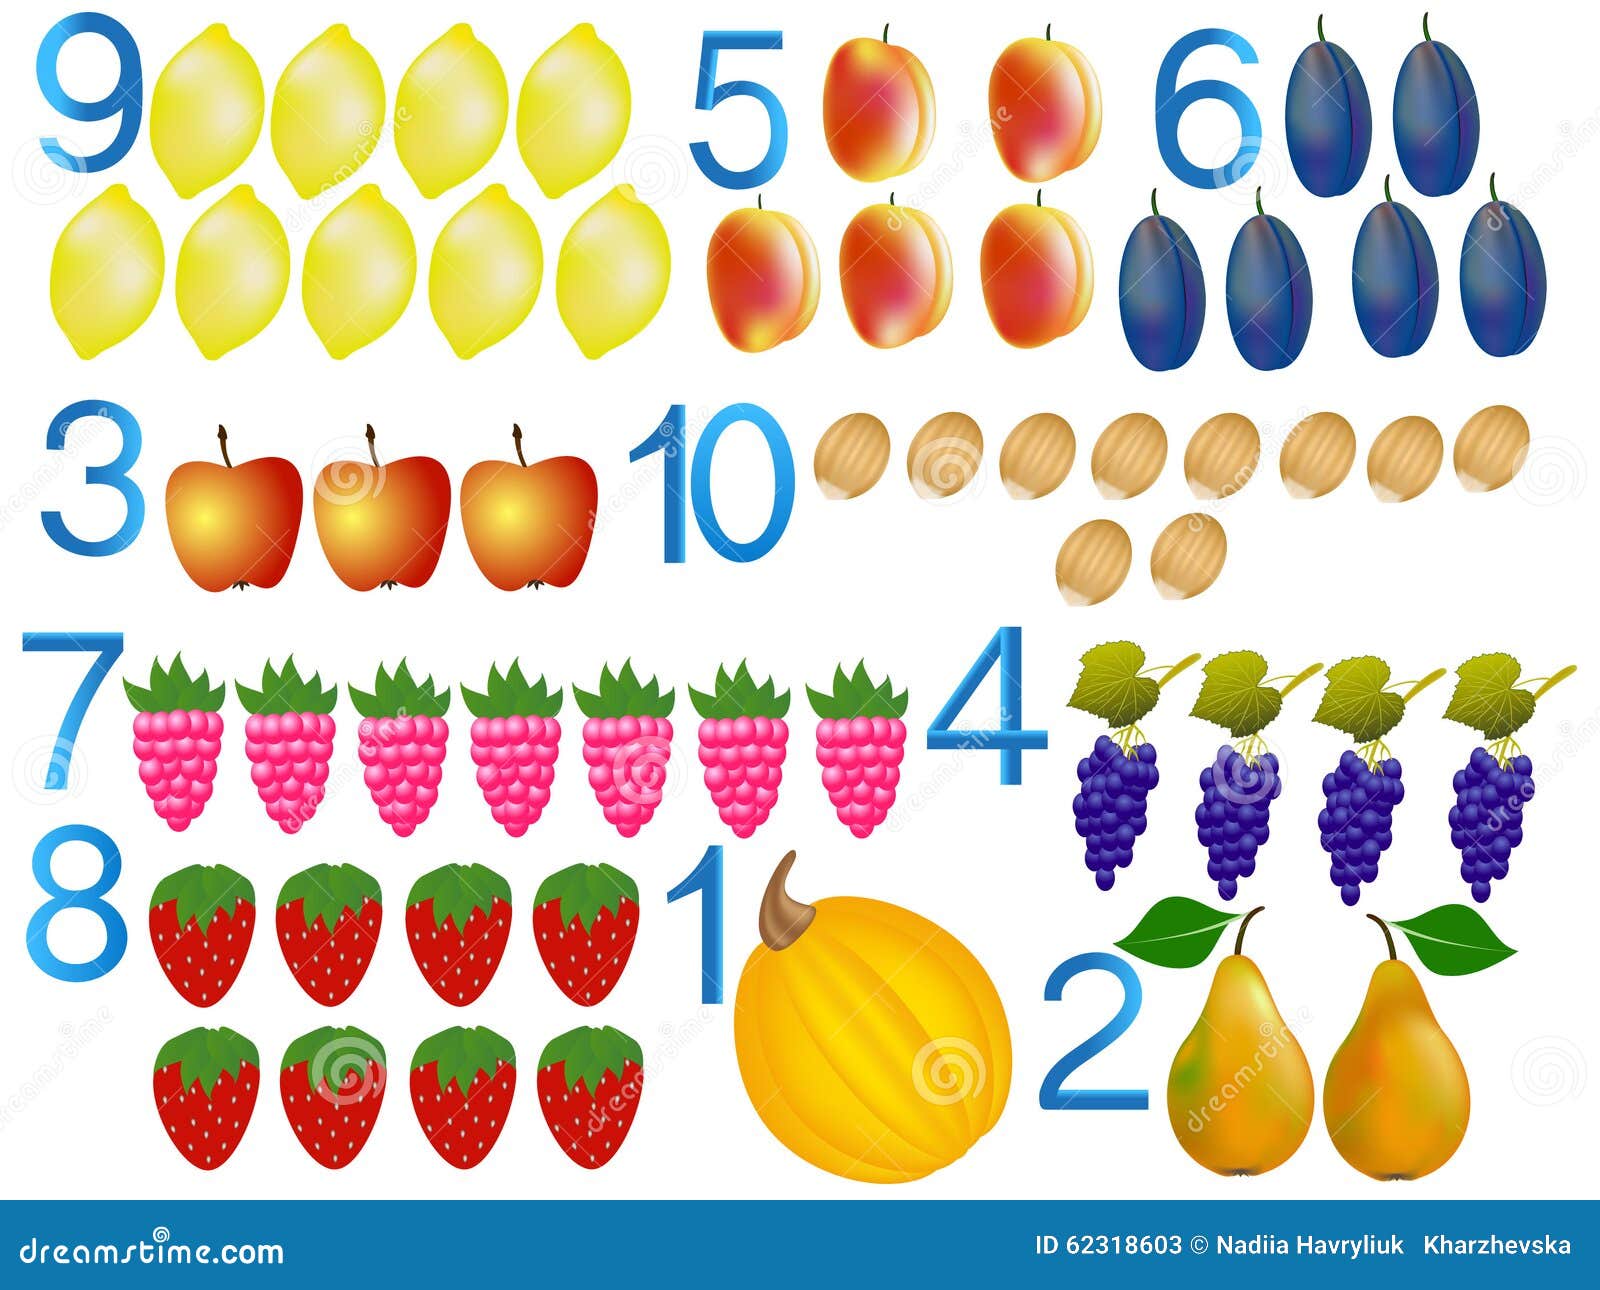 Fruits число. Fruit numbers. Numbers with Fruit. Count Fruit write numbers. Numbers from 1-5 matching with Fruits.